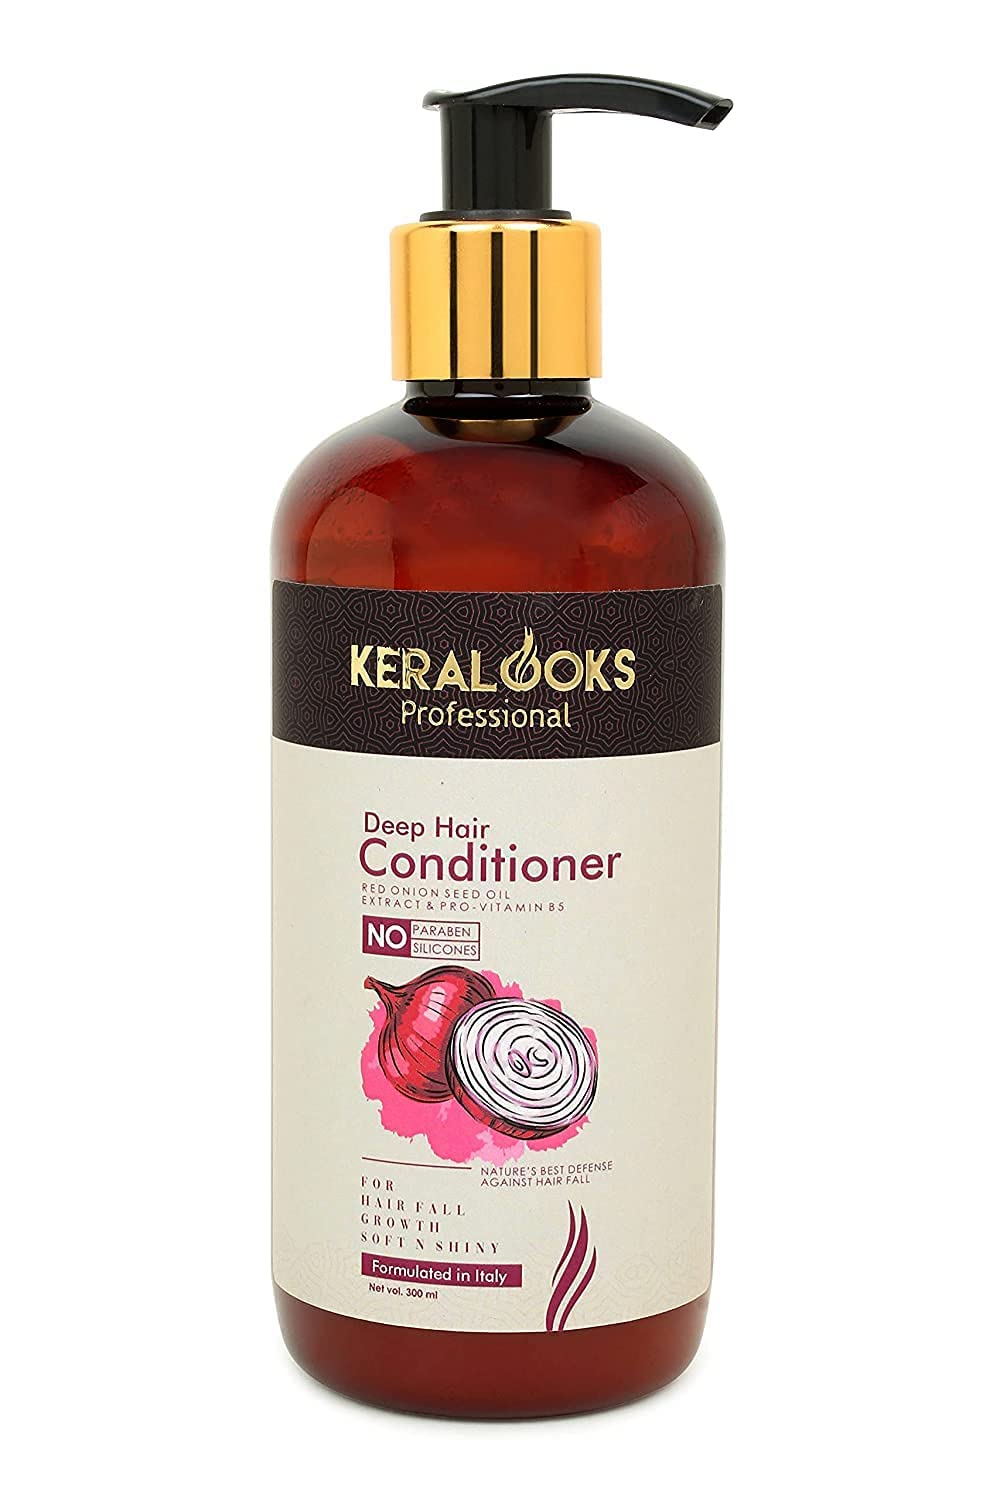 Keralooks professional® Red Onion seed oil conditioner for Hairfall (300ml)